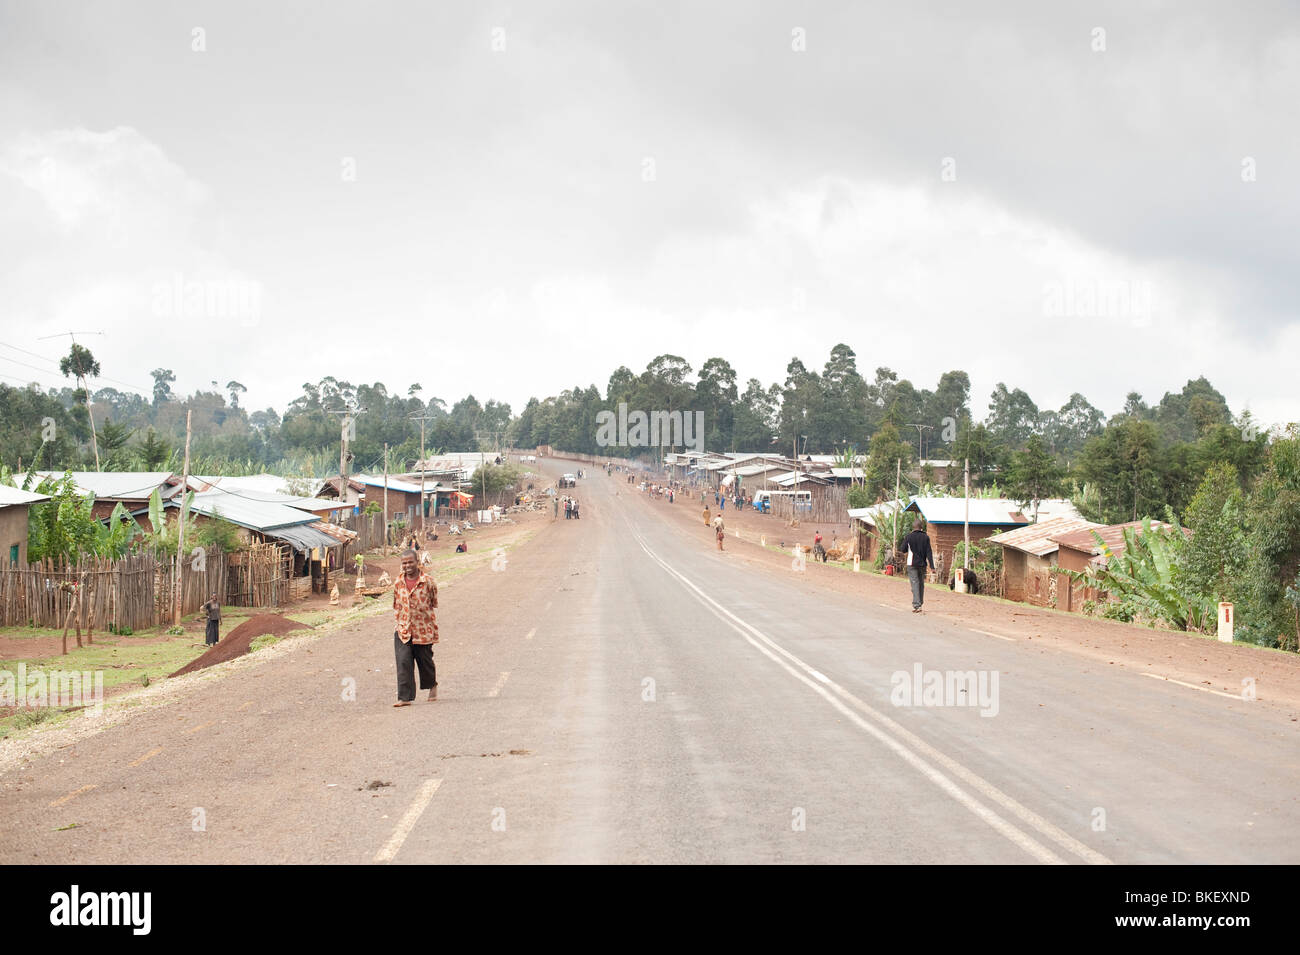 Tarmac road in Hobicheka in the Southern Nations, Nationalities, and People's Region of Ethiopia Stock Photo